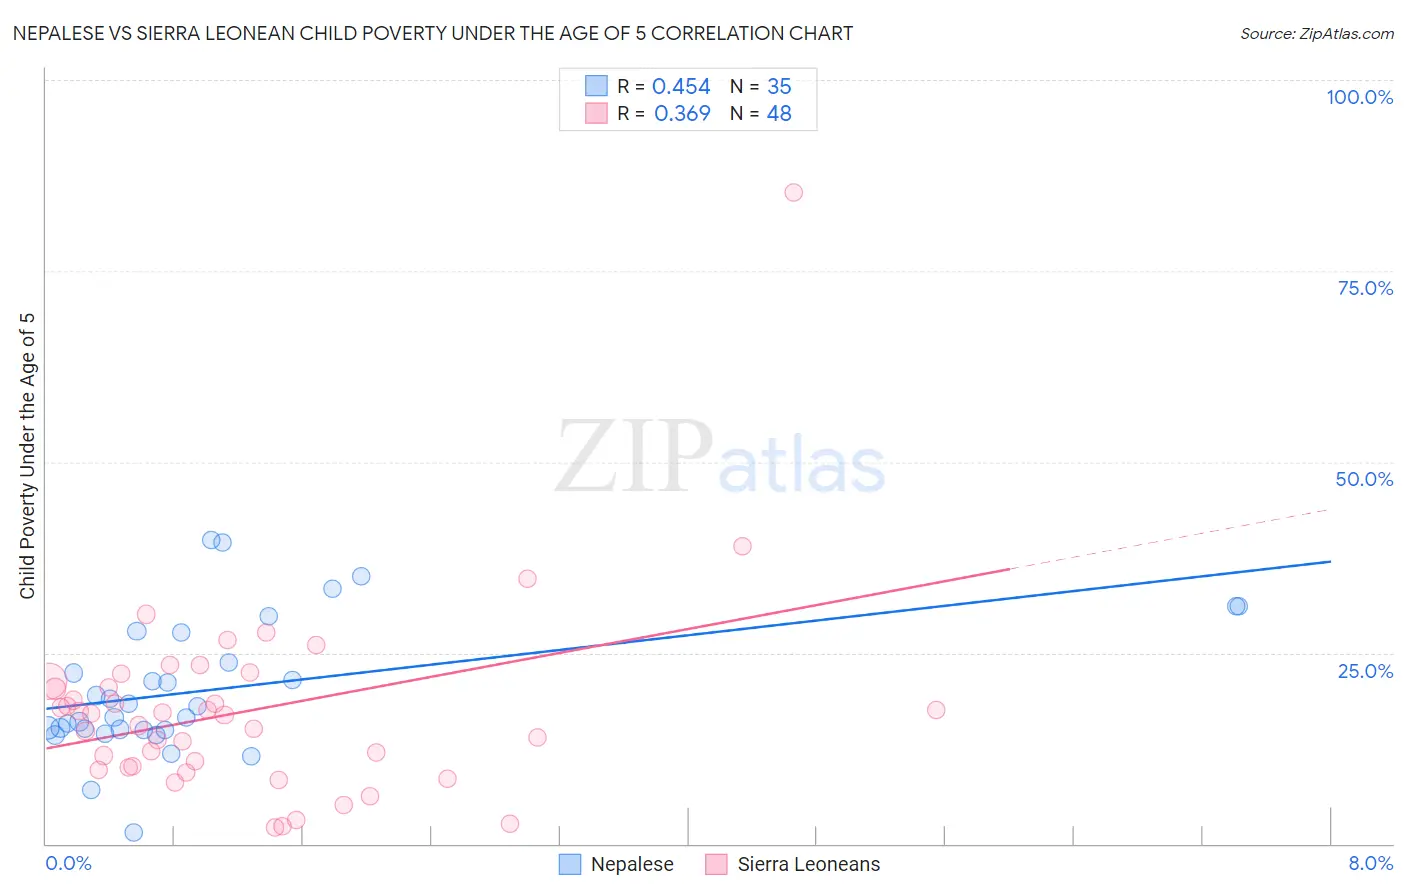 Nepalese vs Sierra Leonean Child Poverty Under the Age of 5